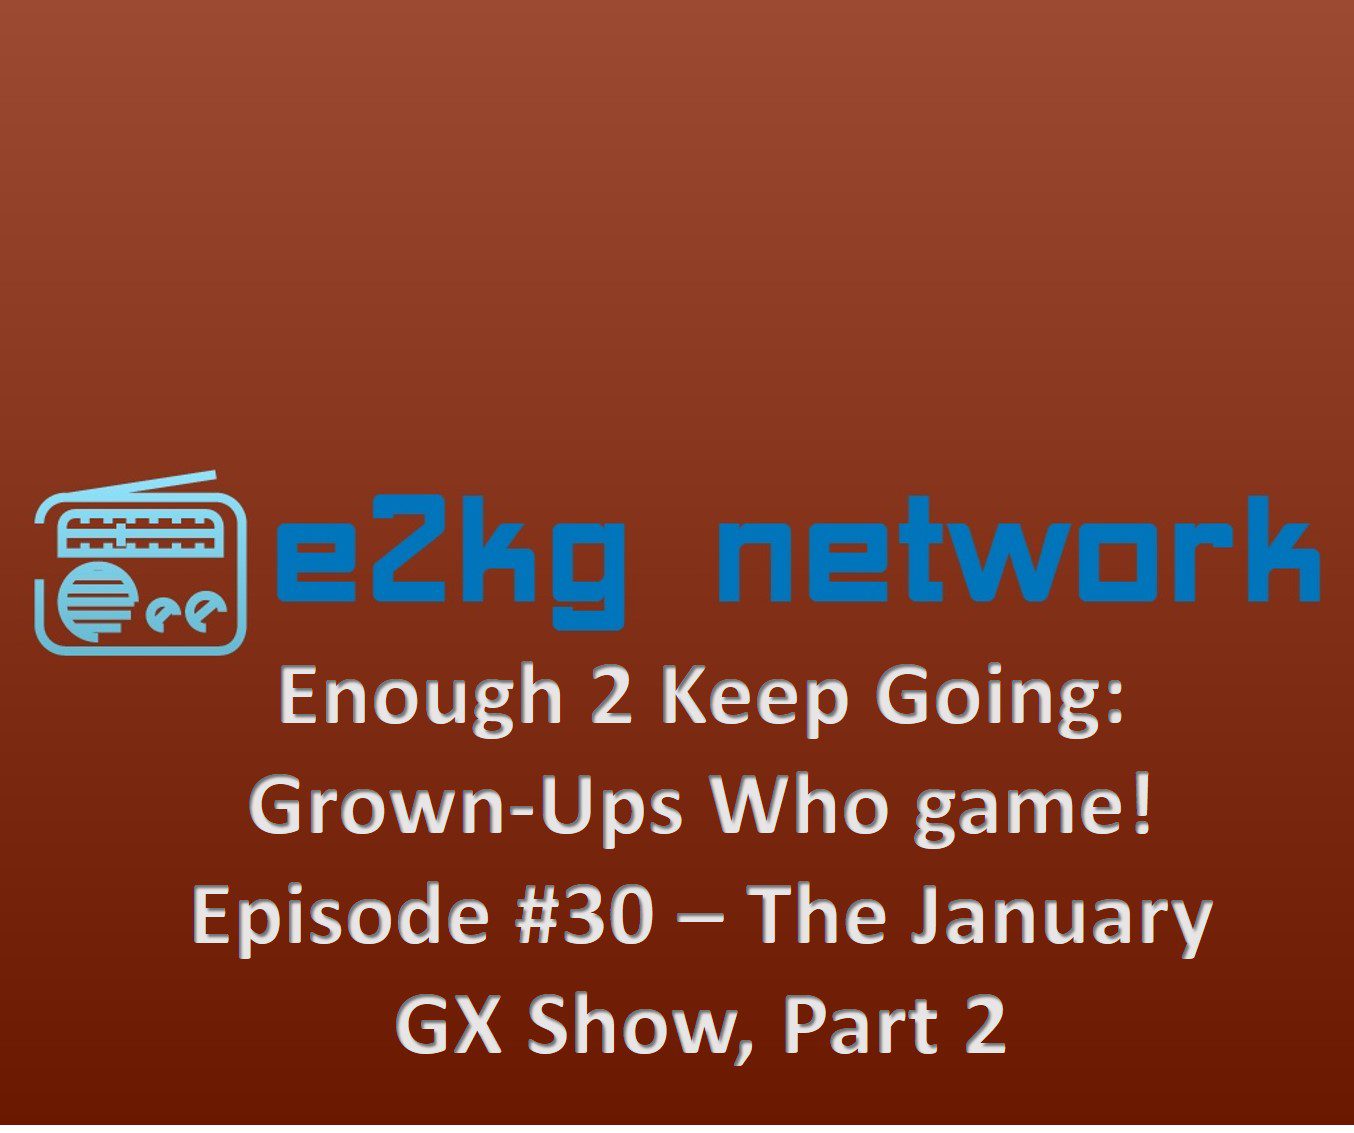 Enough 2 Keep Going: Grown-Ups Who Game – Episode #30 (GX for Jan 2018 Part 2)